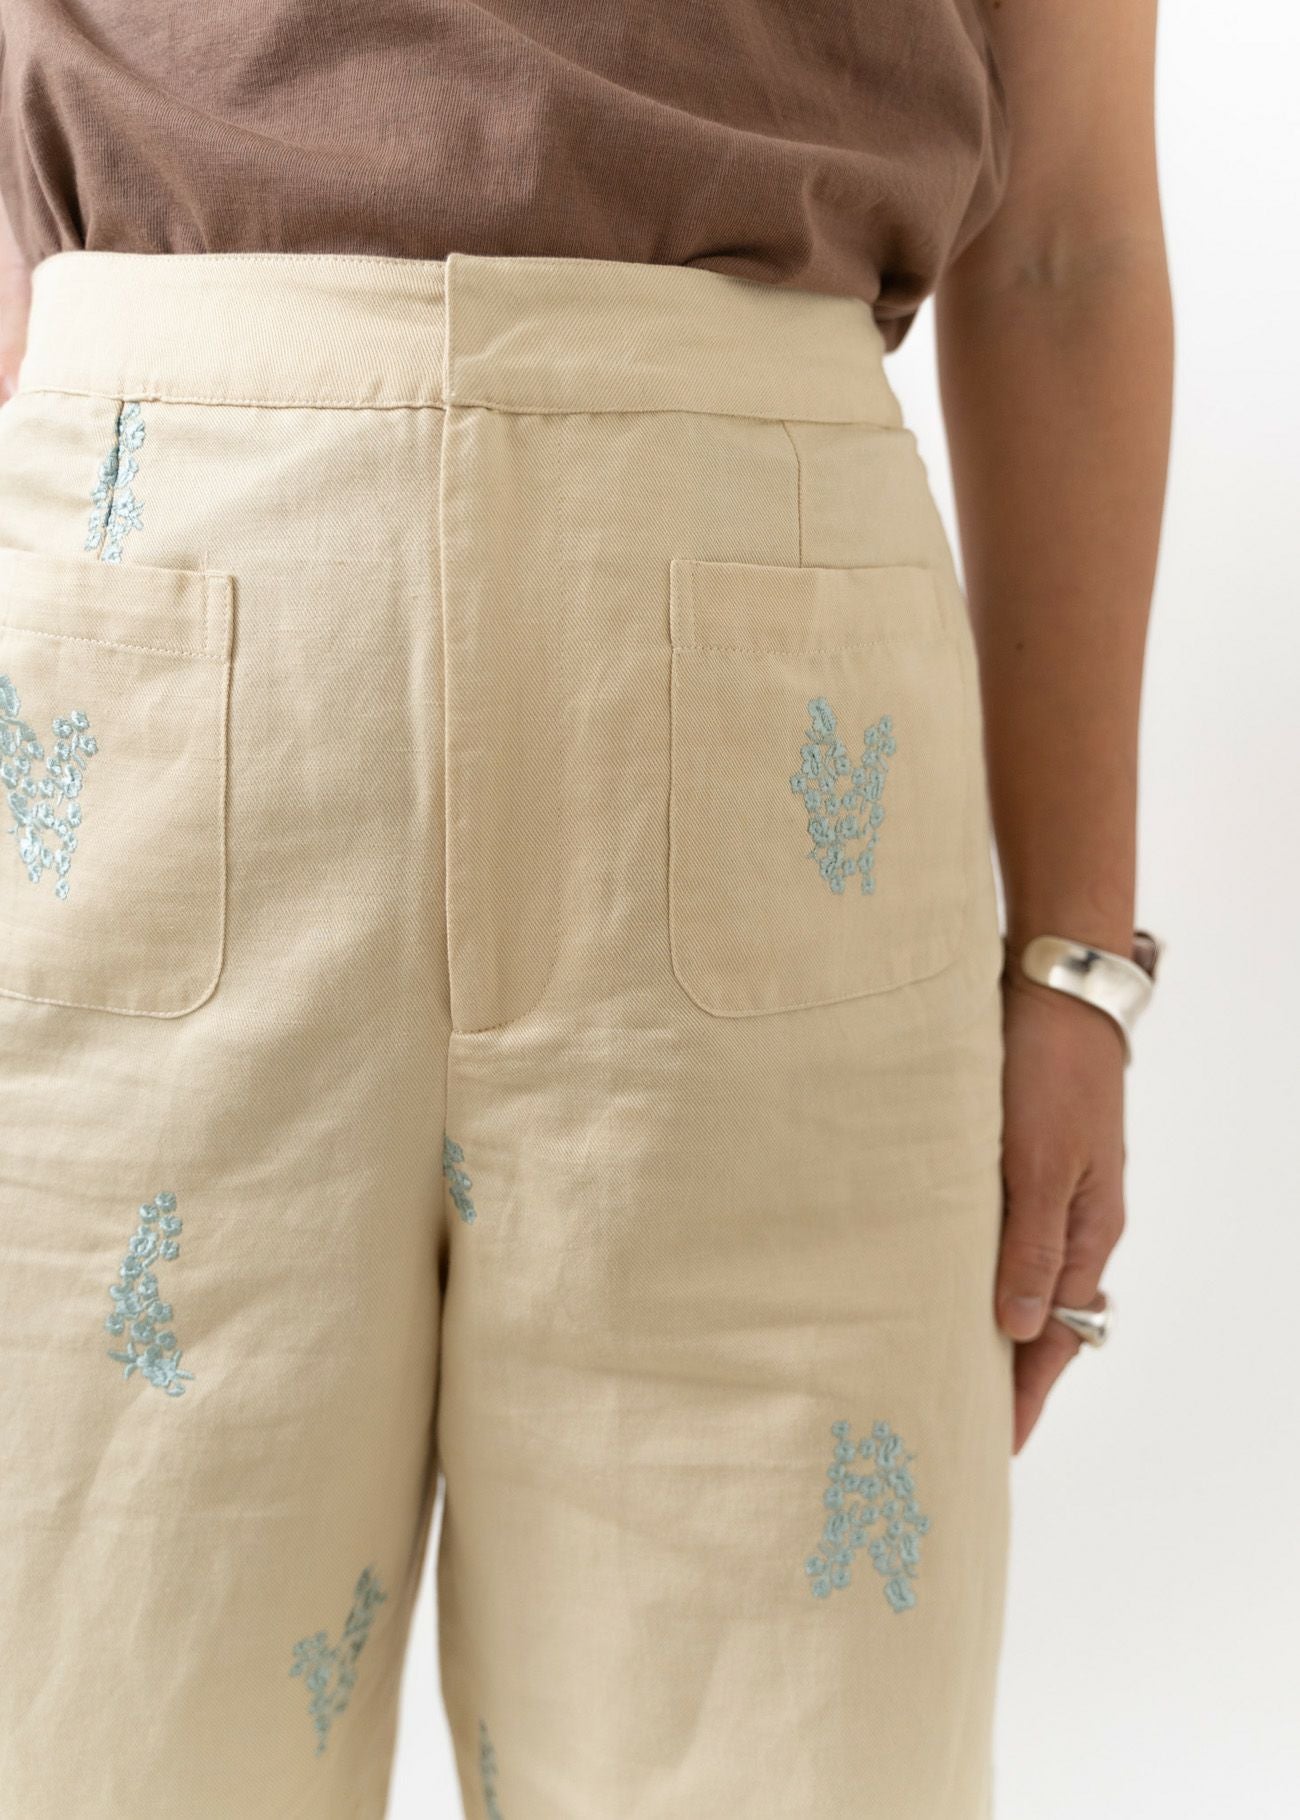 Cotton Linen Twill Embroidery Pants